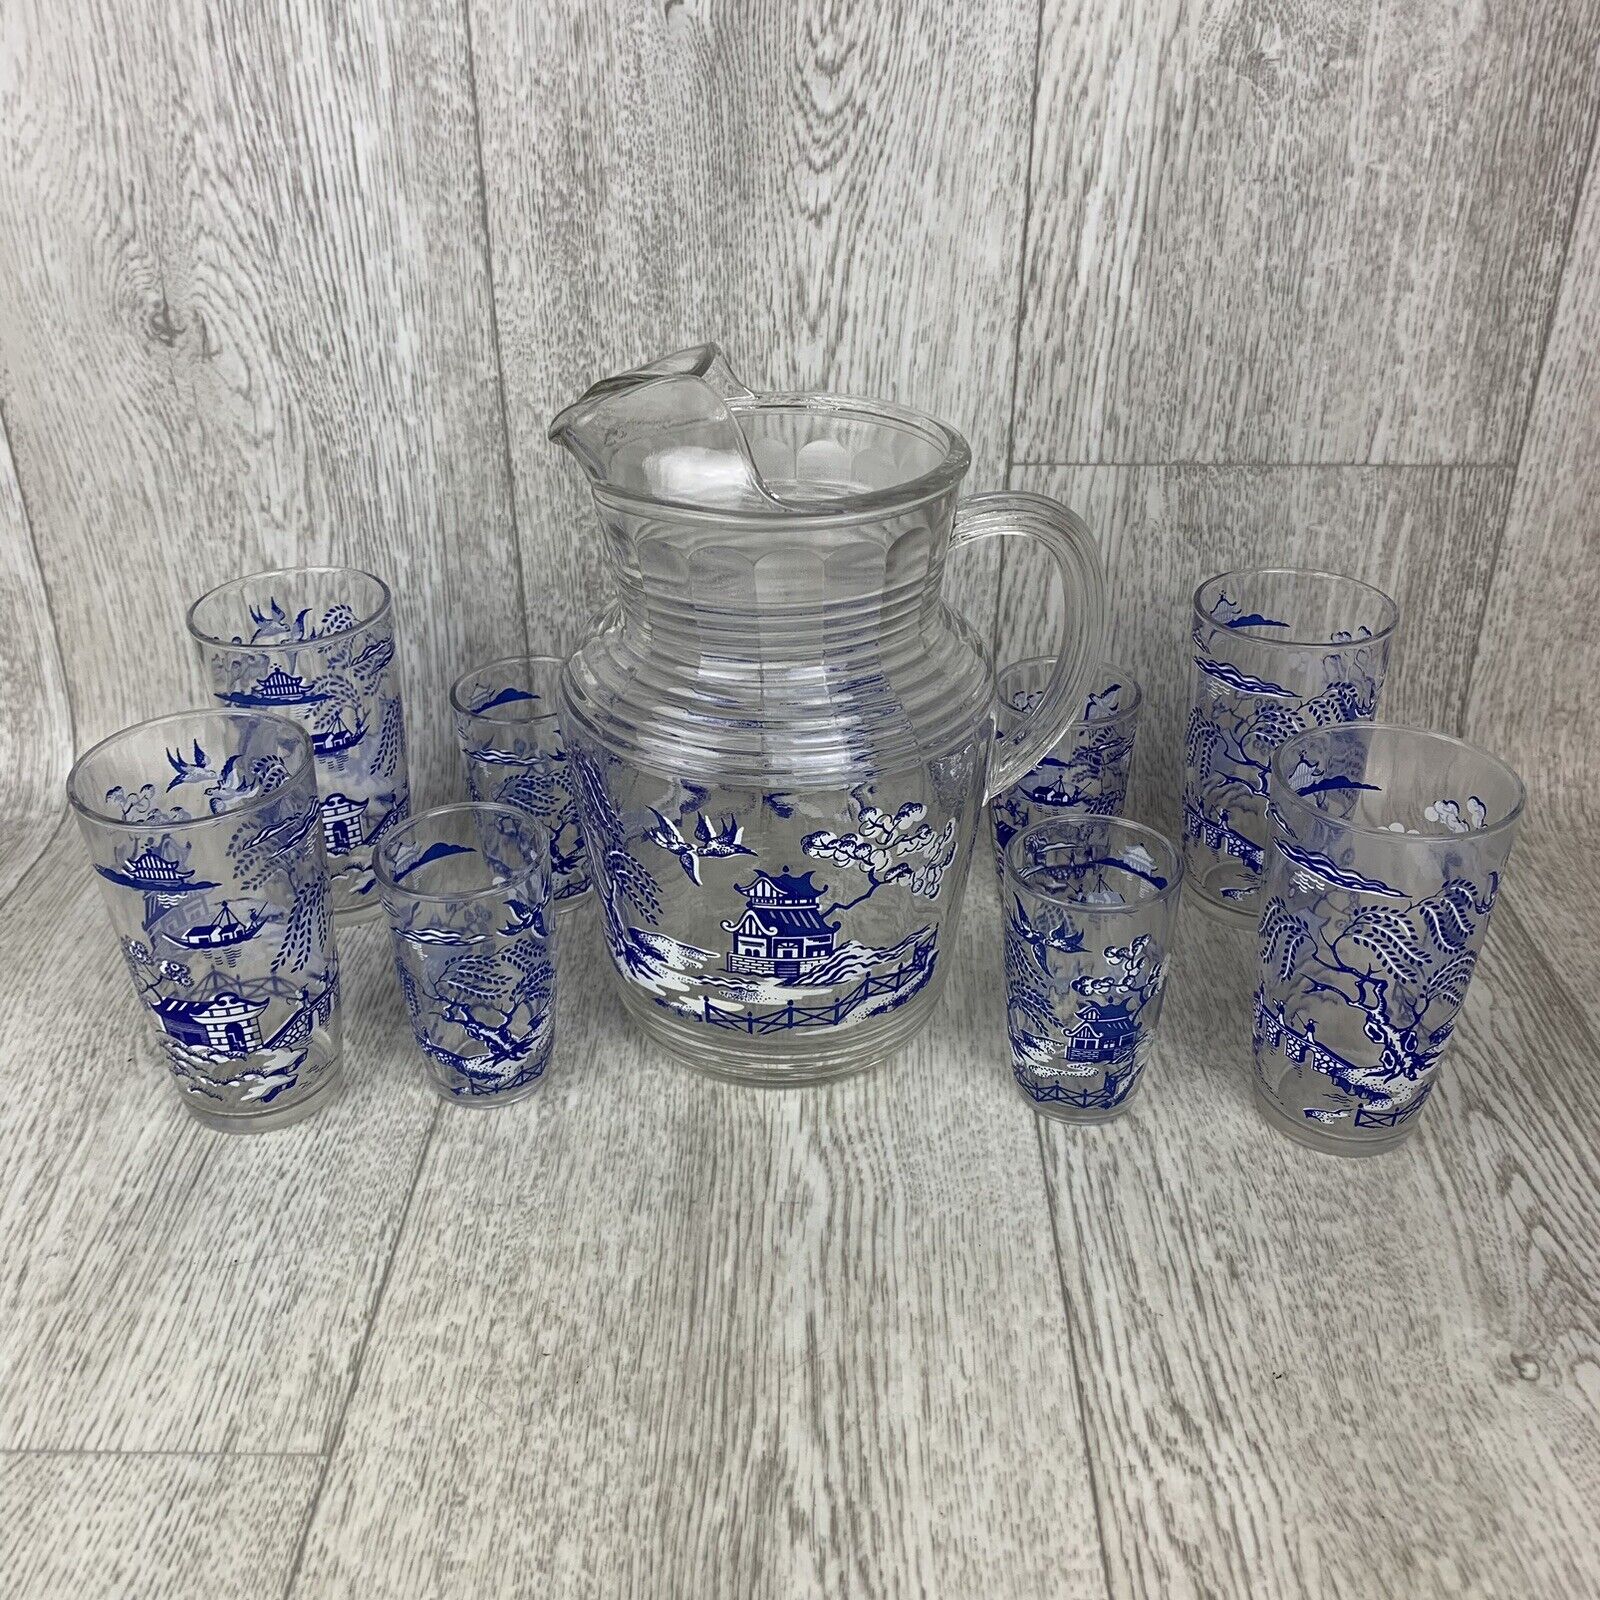 Vintage Blue Willow Glass Pitcher Set With 8 Tumblers Glasses 4 = 6oz & 4 = 12oz